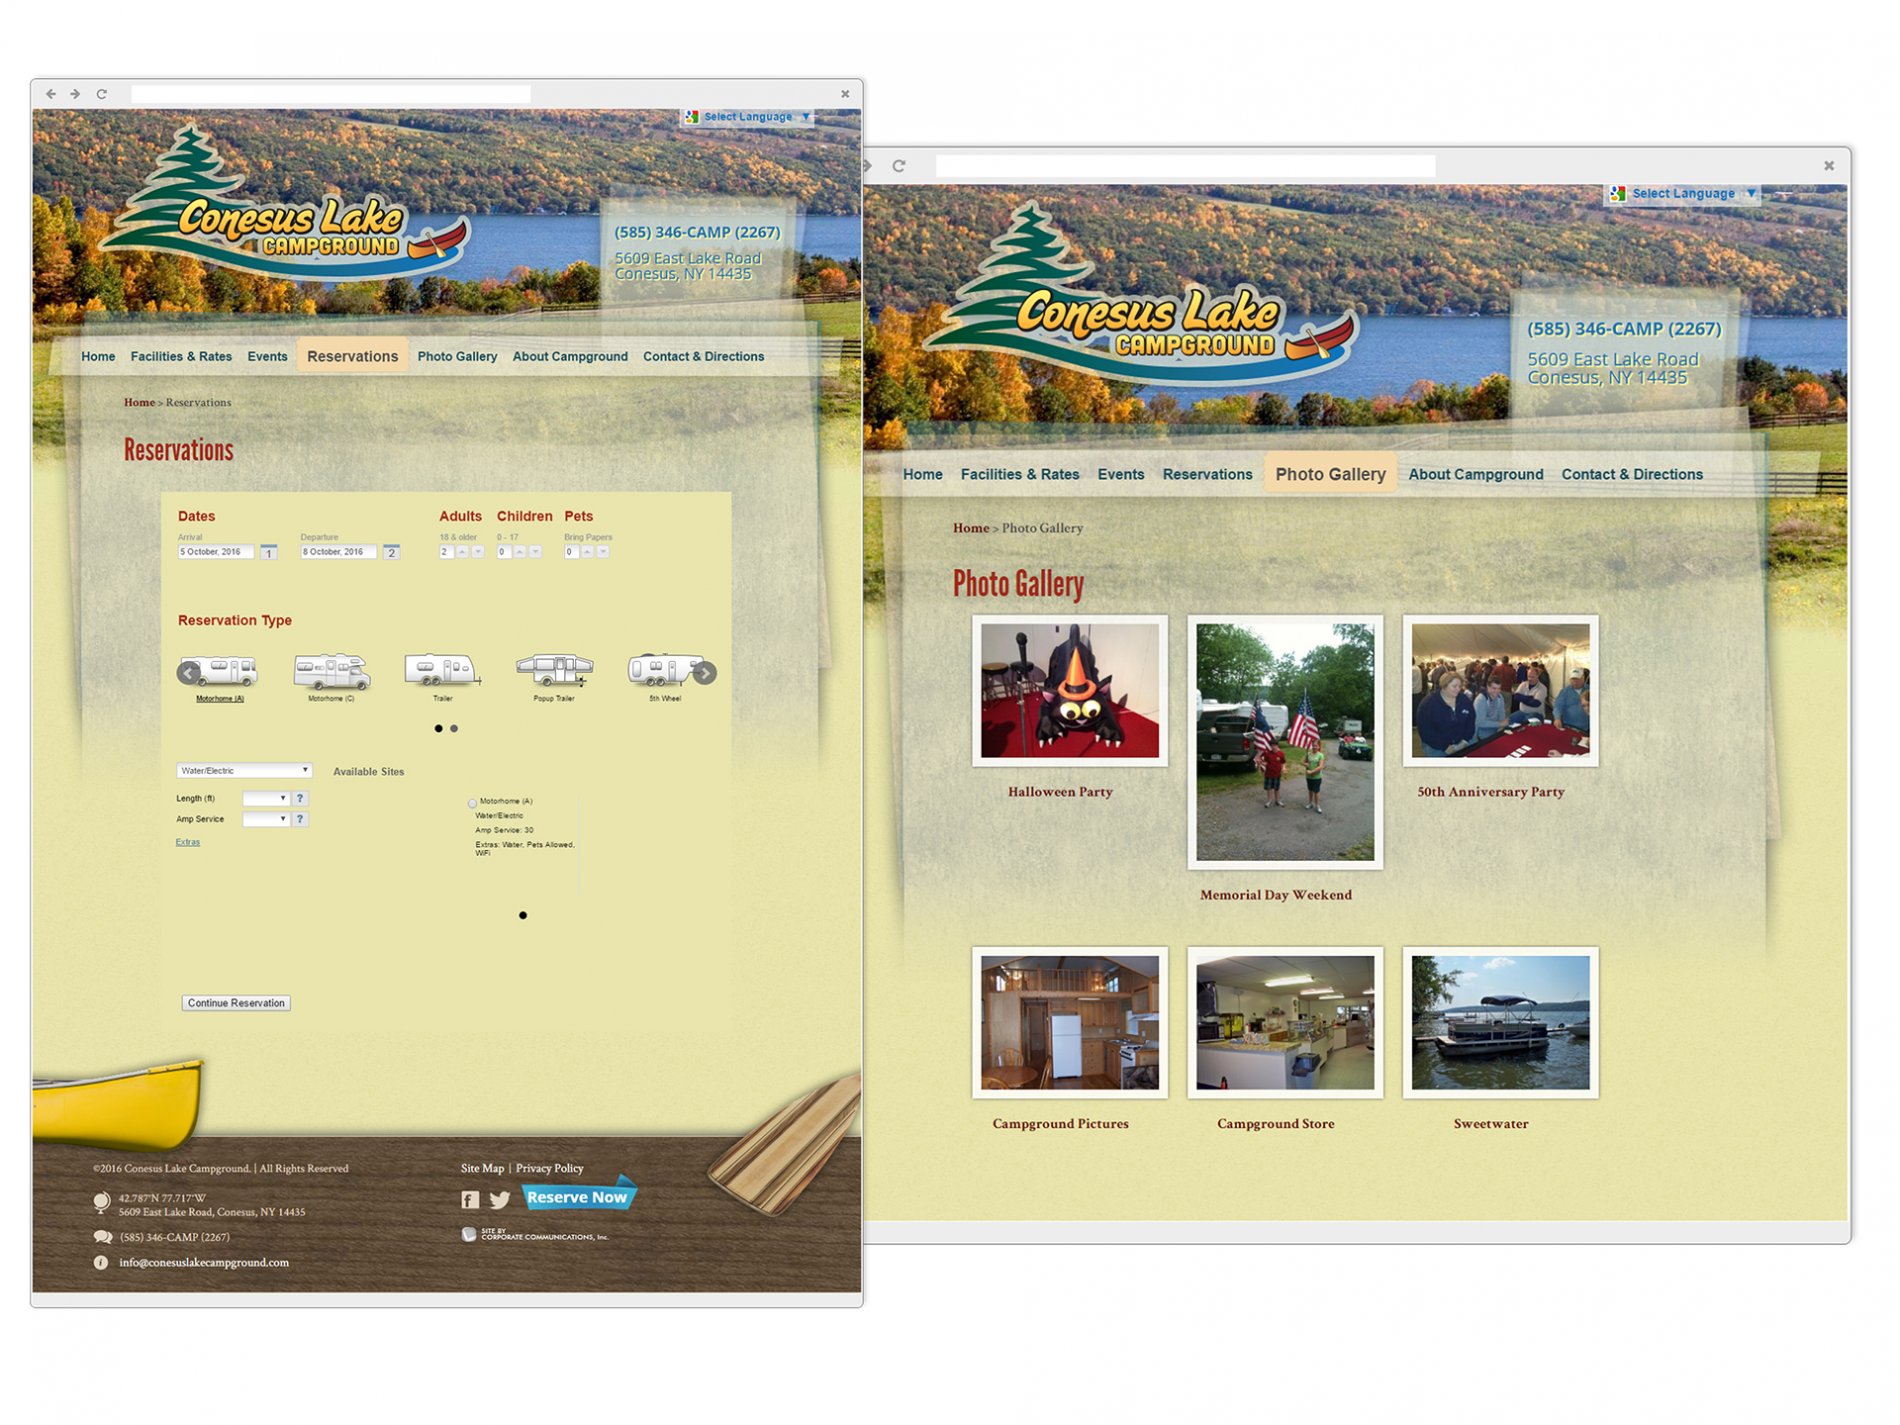 Online Campground Reservations and Photo Gallery